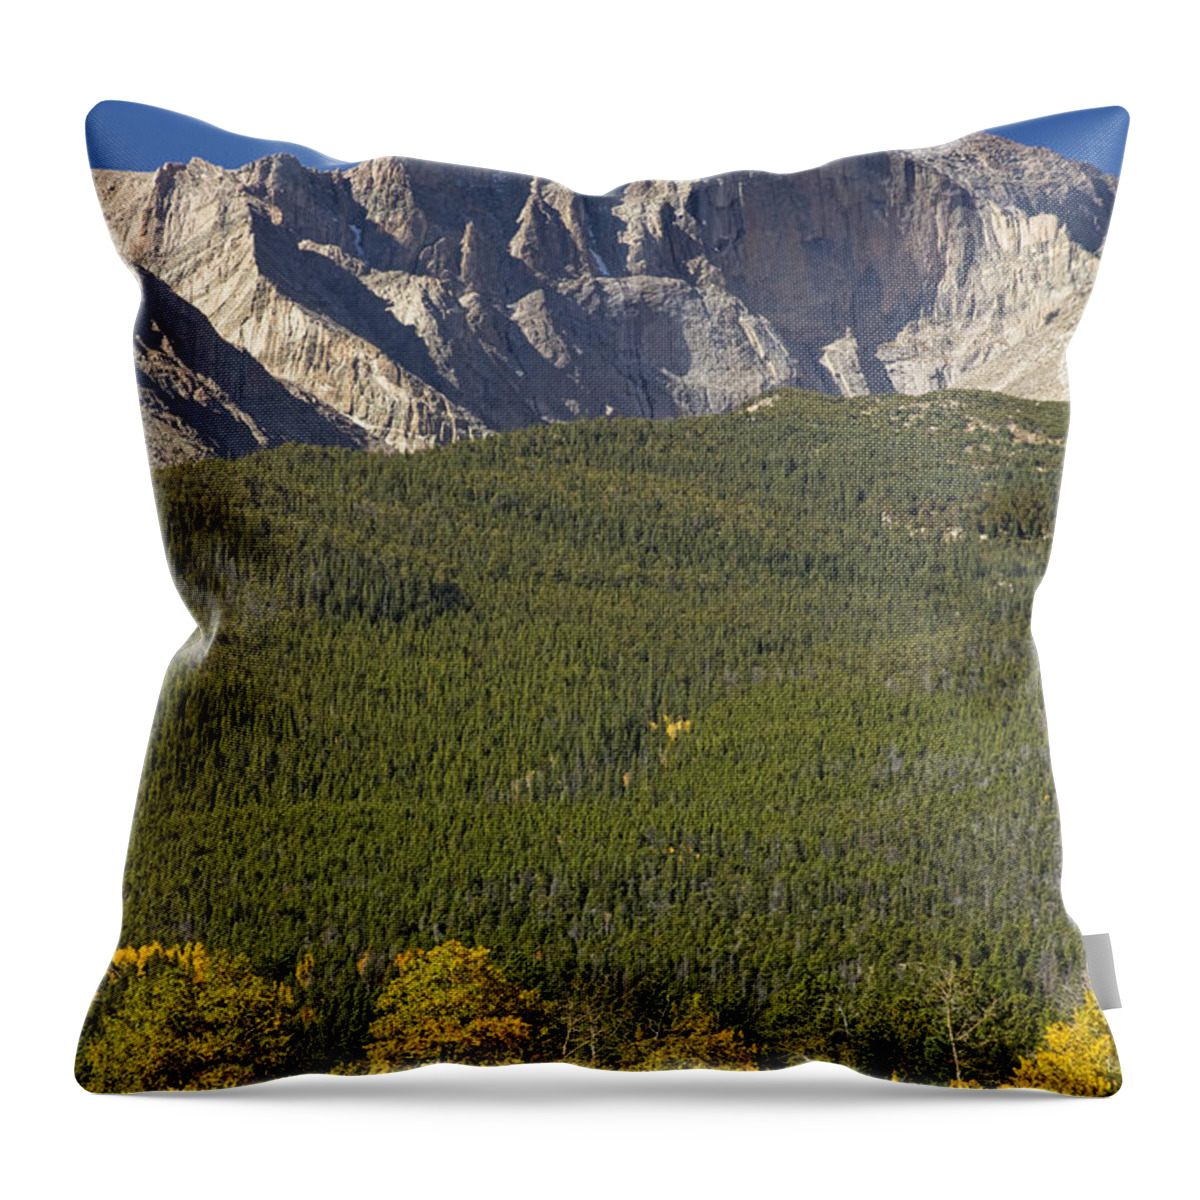 Colorado Throw Pillow featuring the photograph Golden Longs Peak View by James BO Insogna